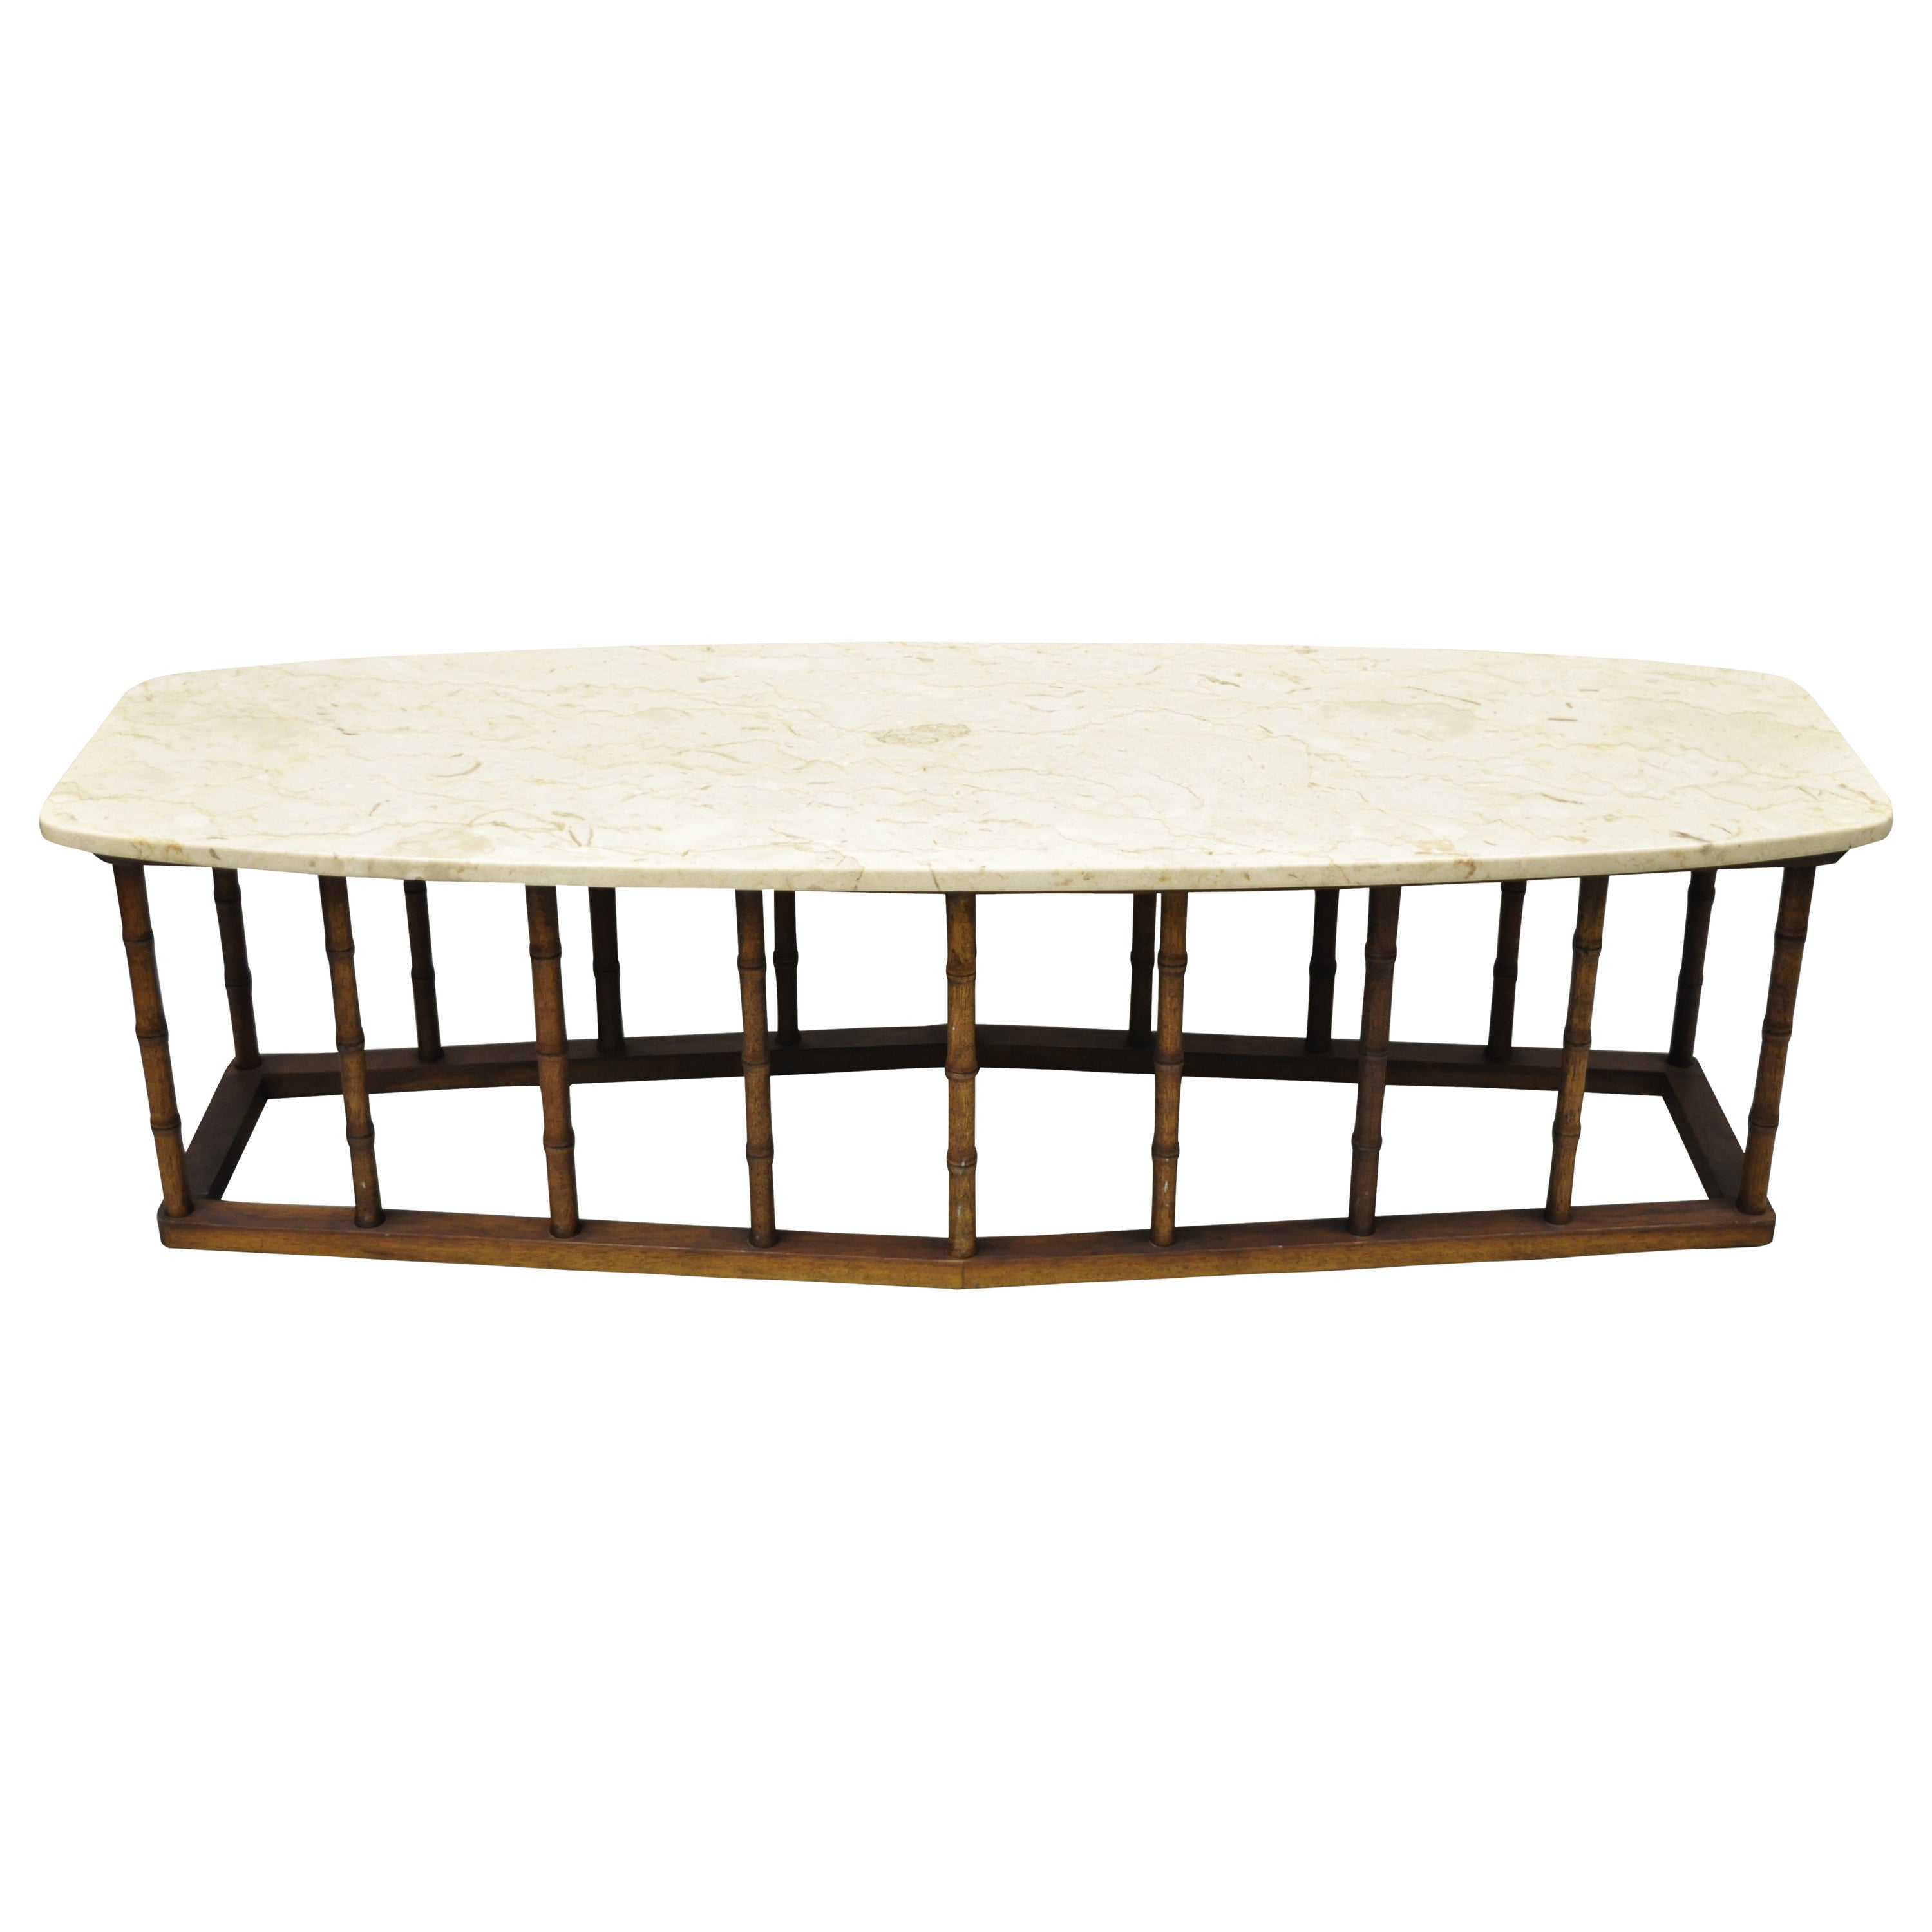 Vintage Hollywood Regency Faux Bamboo Travertine Marble Surfboard Coffee Table